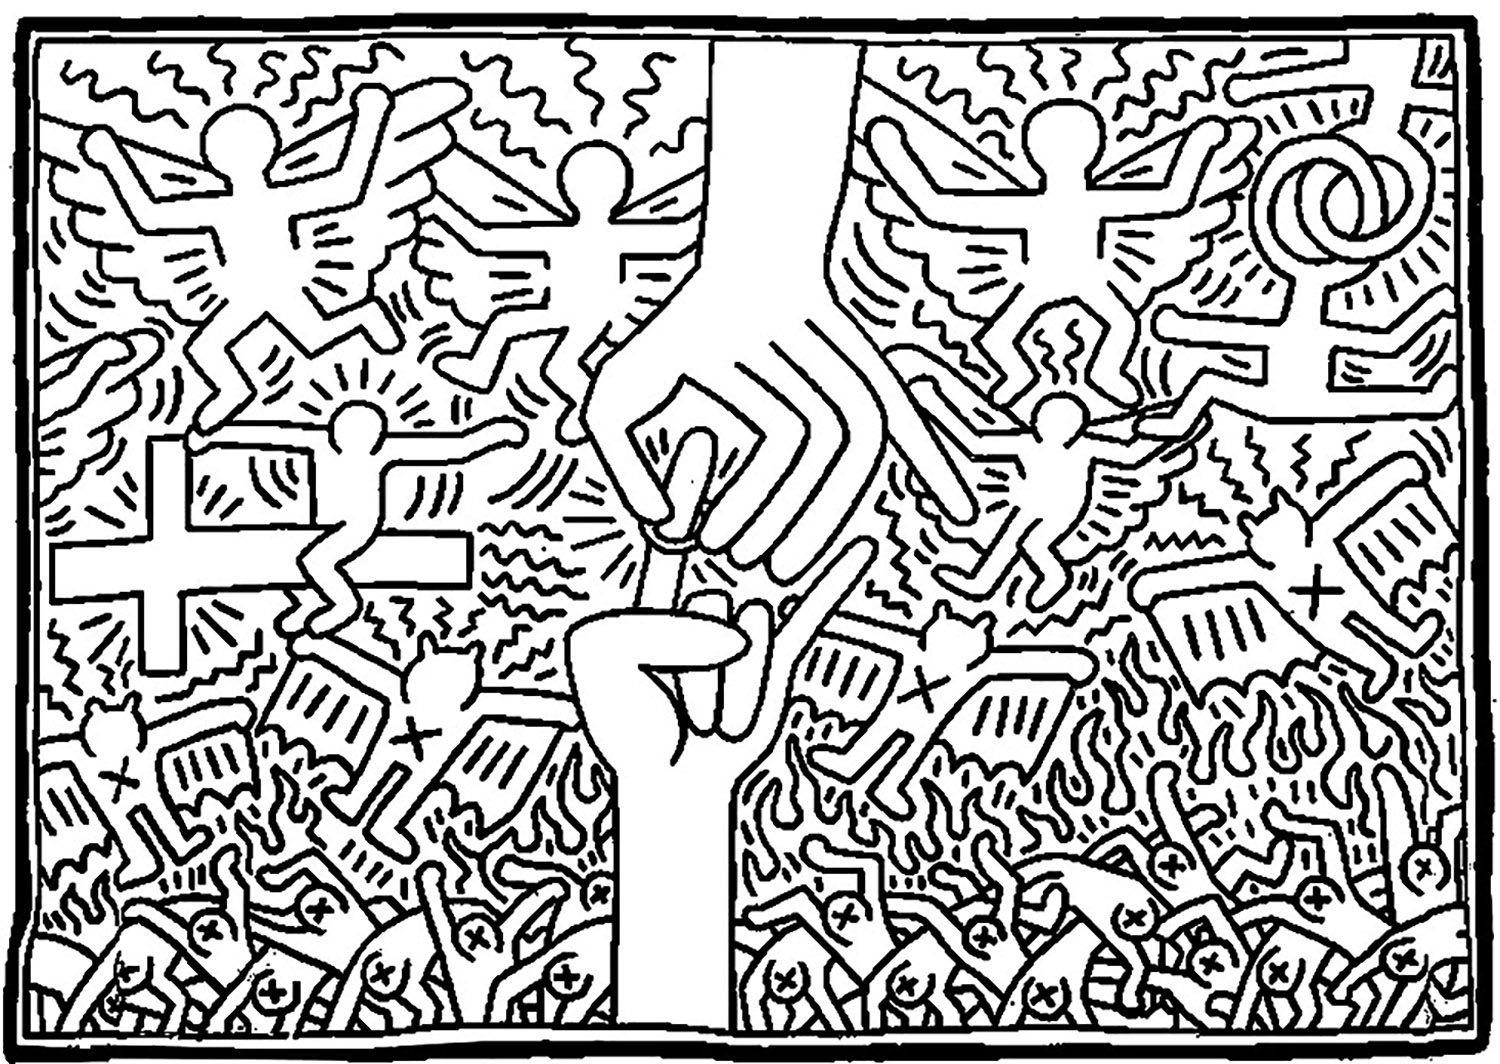 Coloring page created from a Keith Haring painting